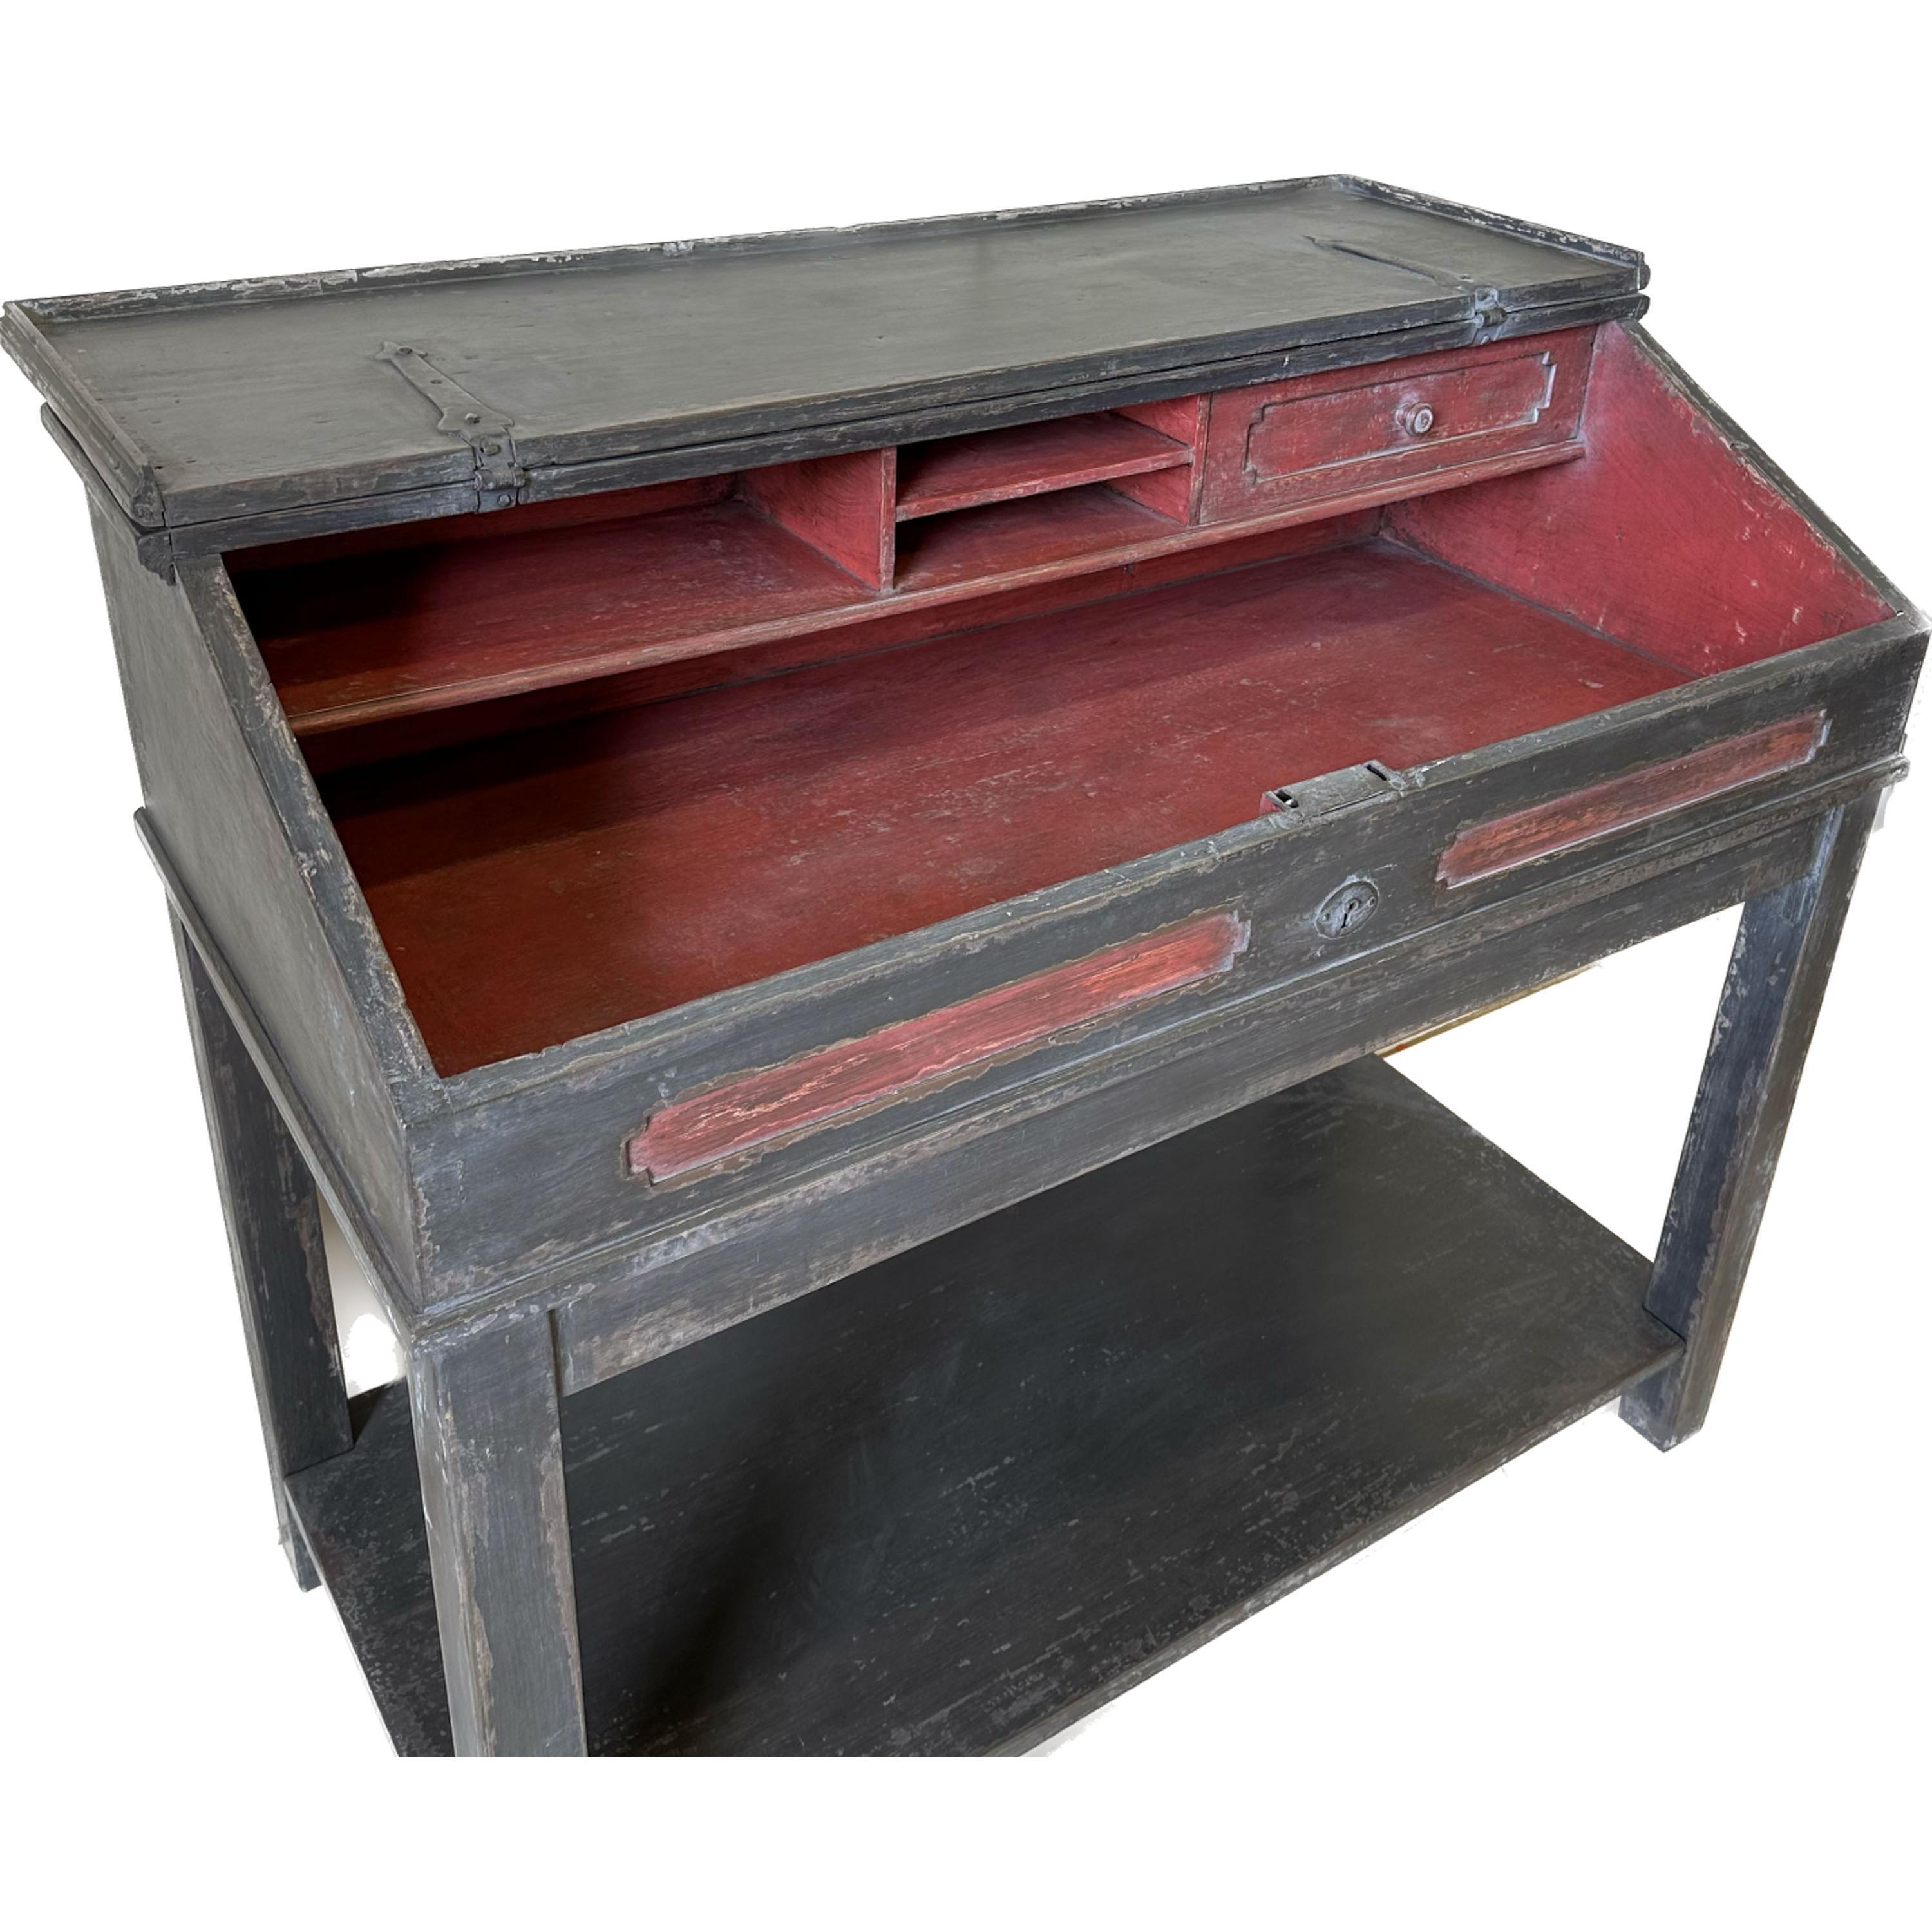 Lectern-style Desk with hinged Lid, Grey and Red, 19th Century In Good Condition For Sale In Greding, DE